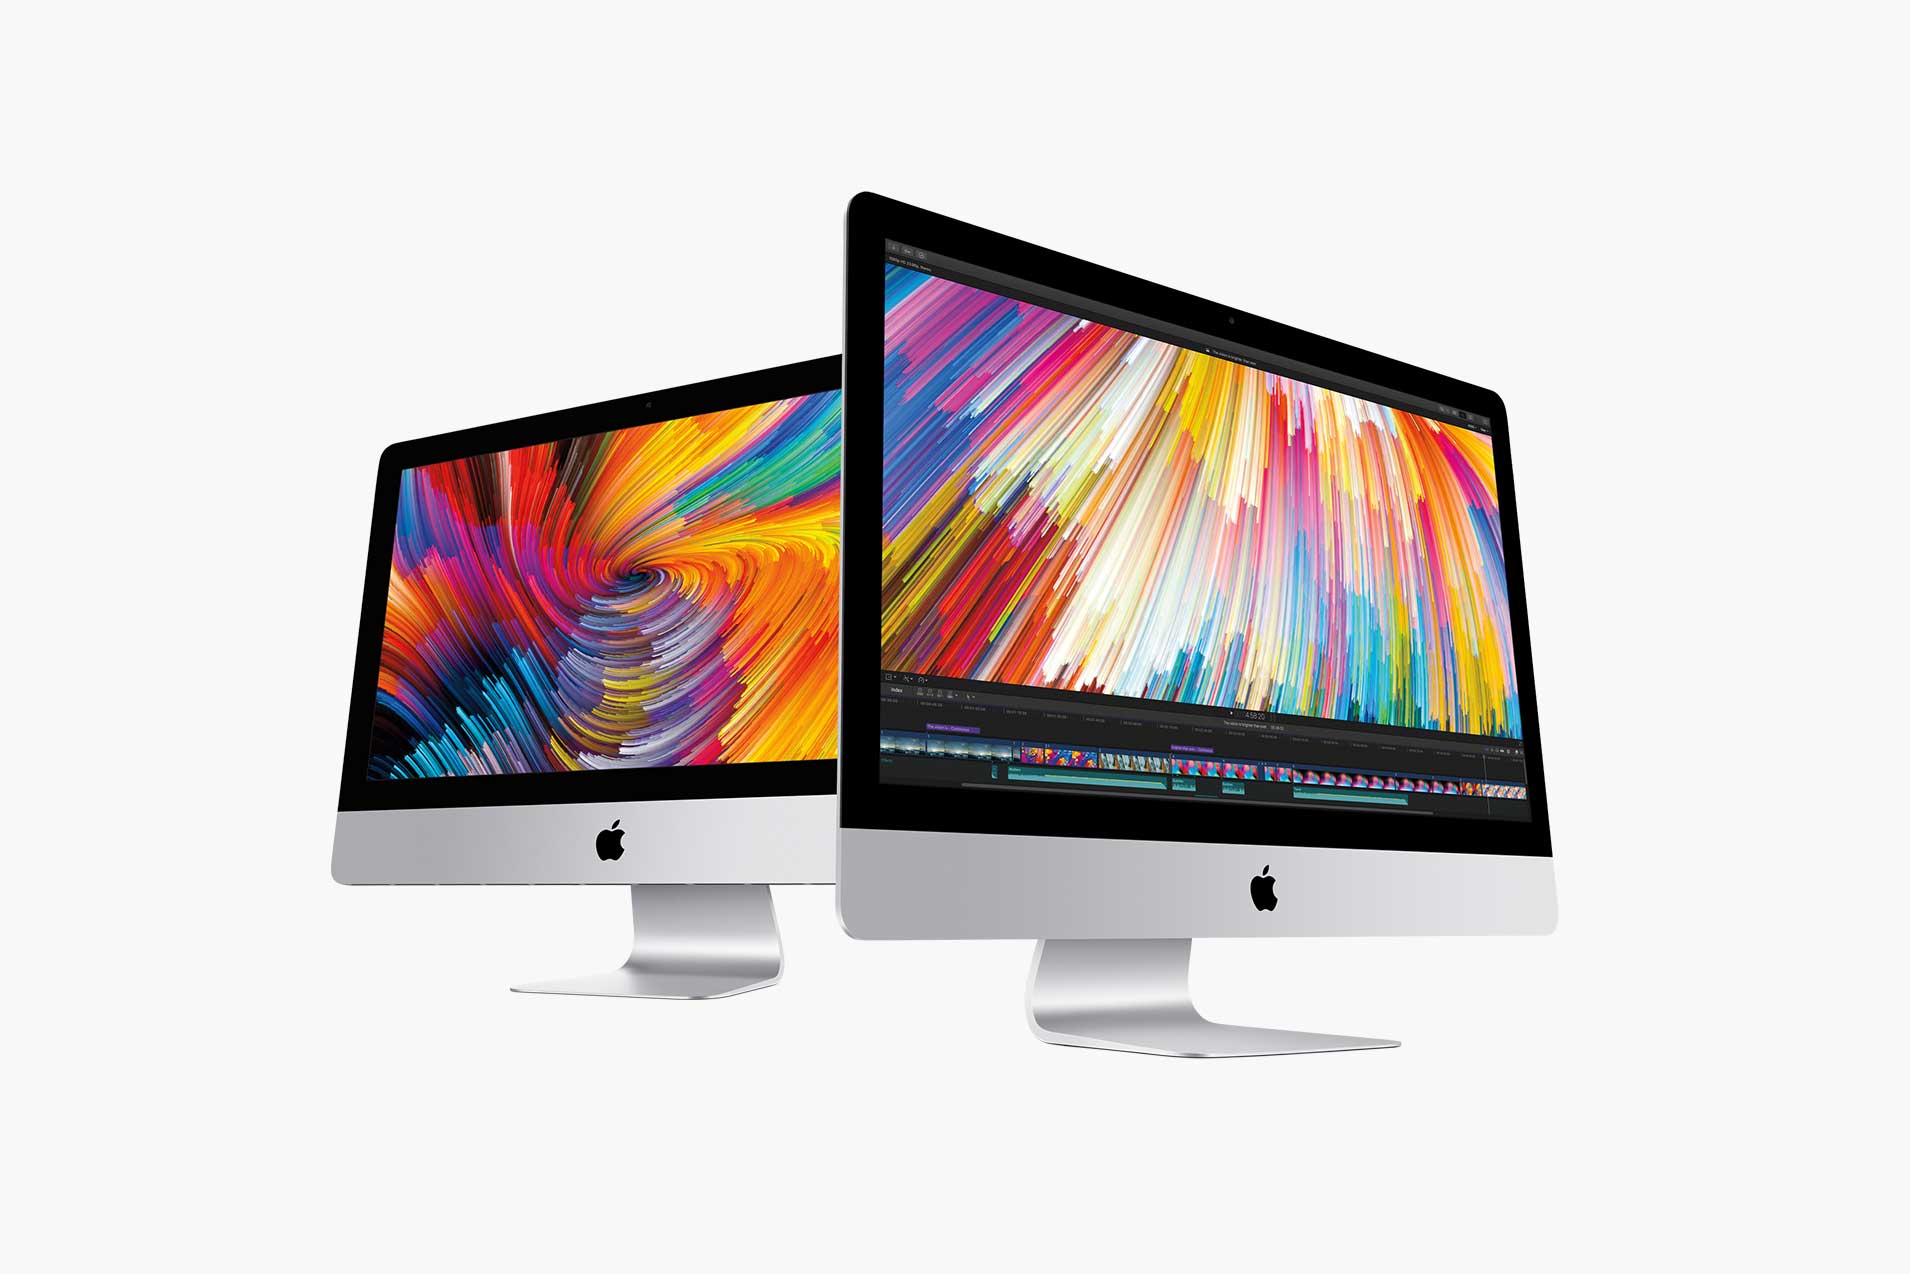 iMac – The vision is brighter than ever.